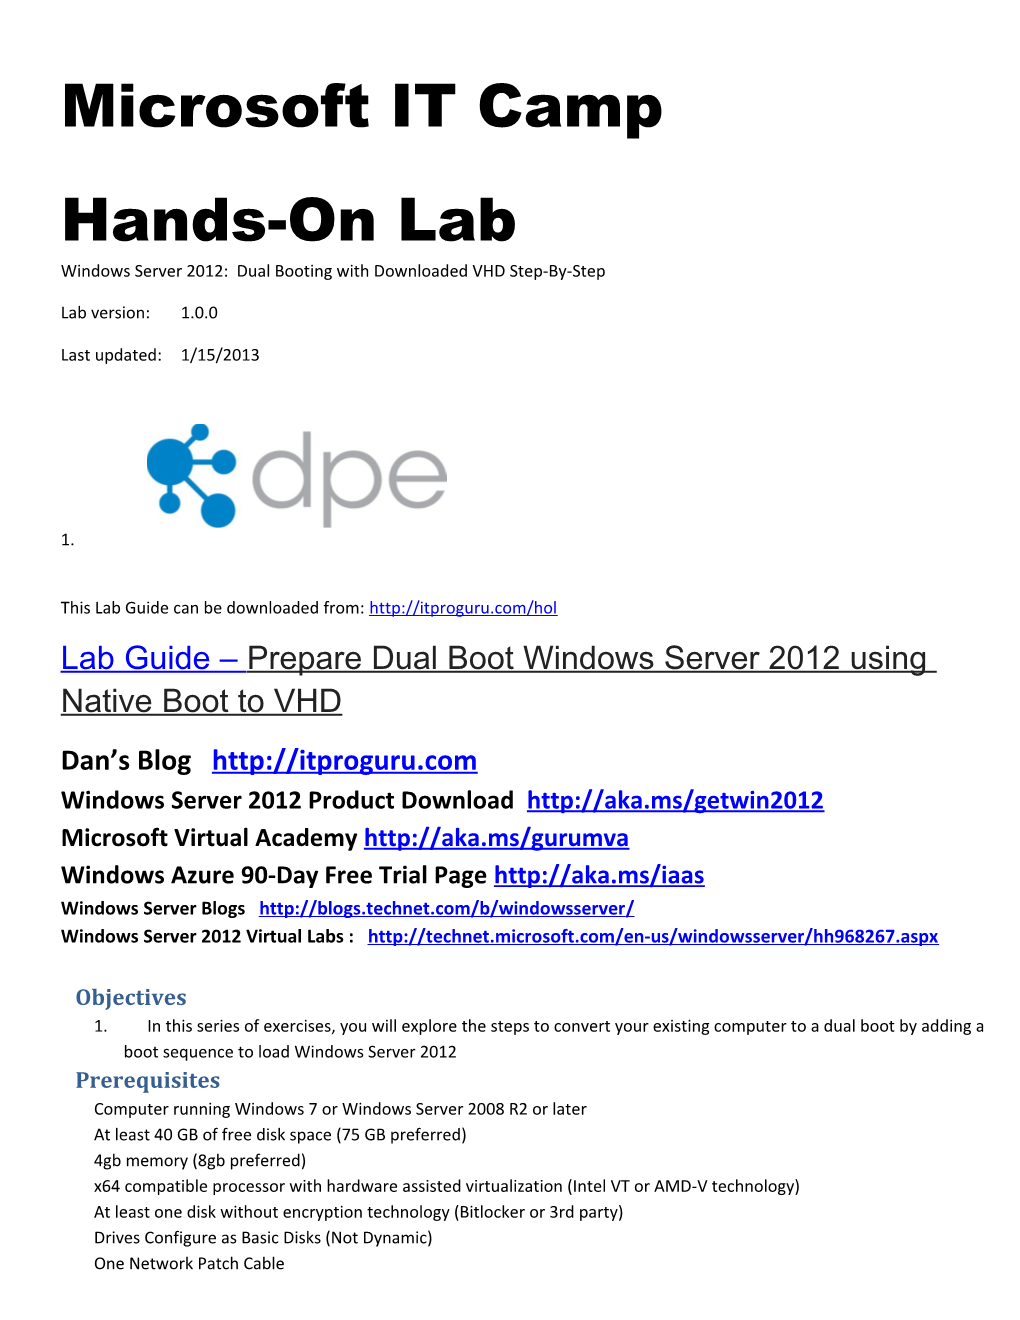 IT Camp -Hands on Lab (HOL) Hyper-V Step-By-Step Guide